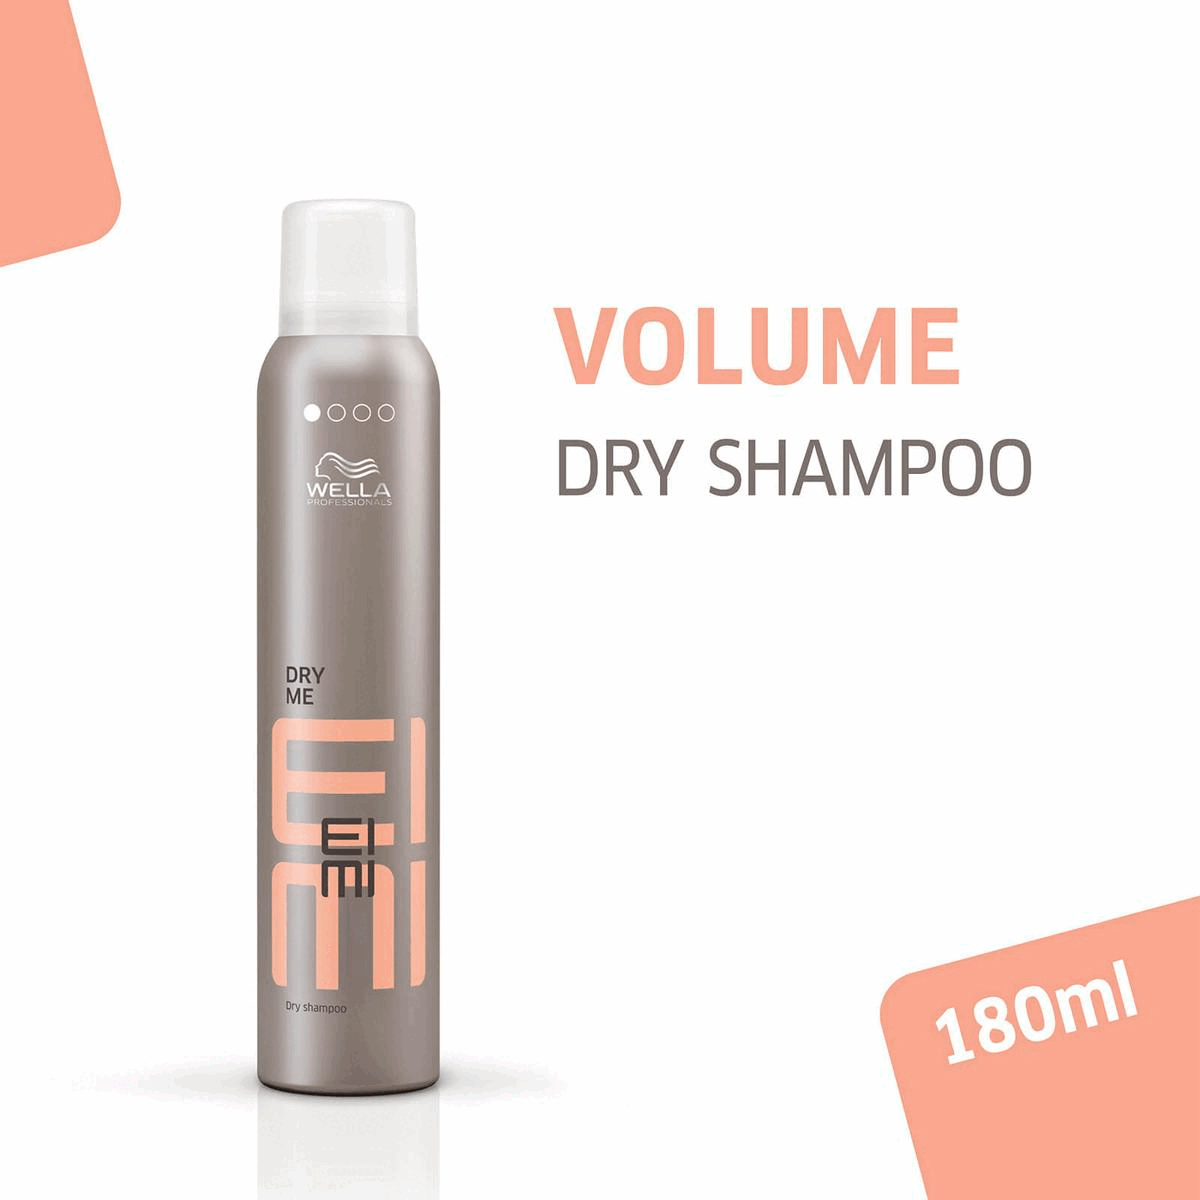 volume dry shampoo. refreshed volumised hair with tapioca starch for refreshed hair. fruity orchard scent. partner reccomendation sold seperately. discover other products